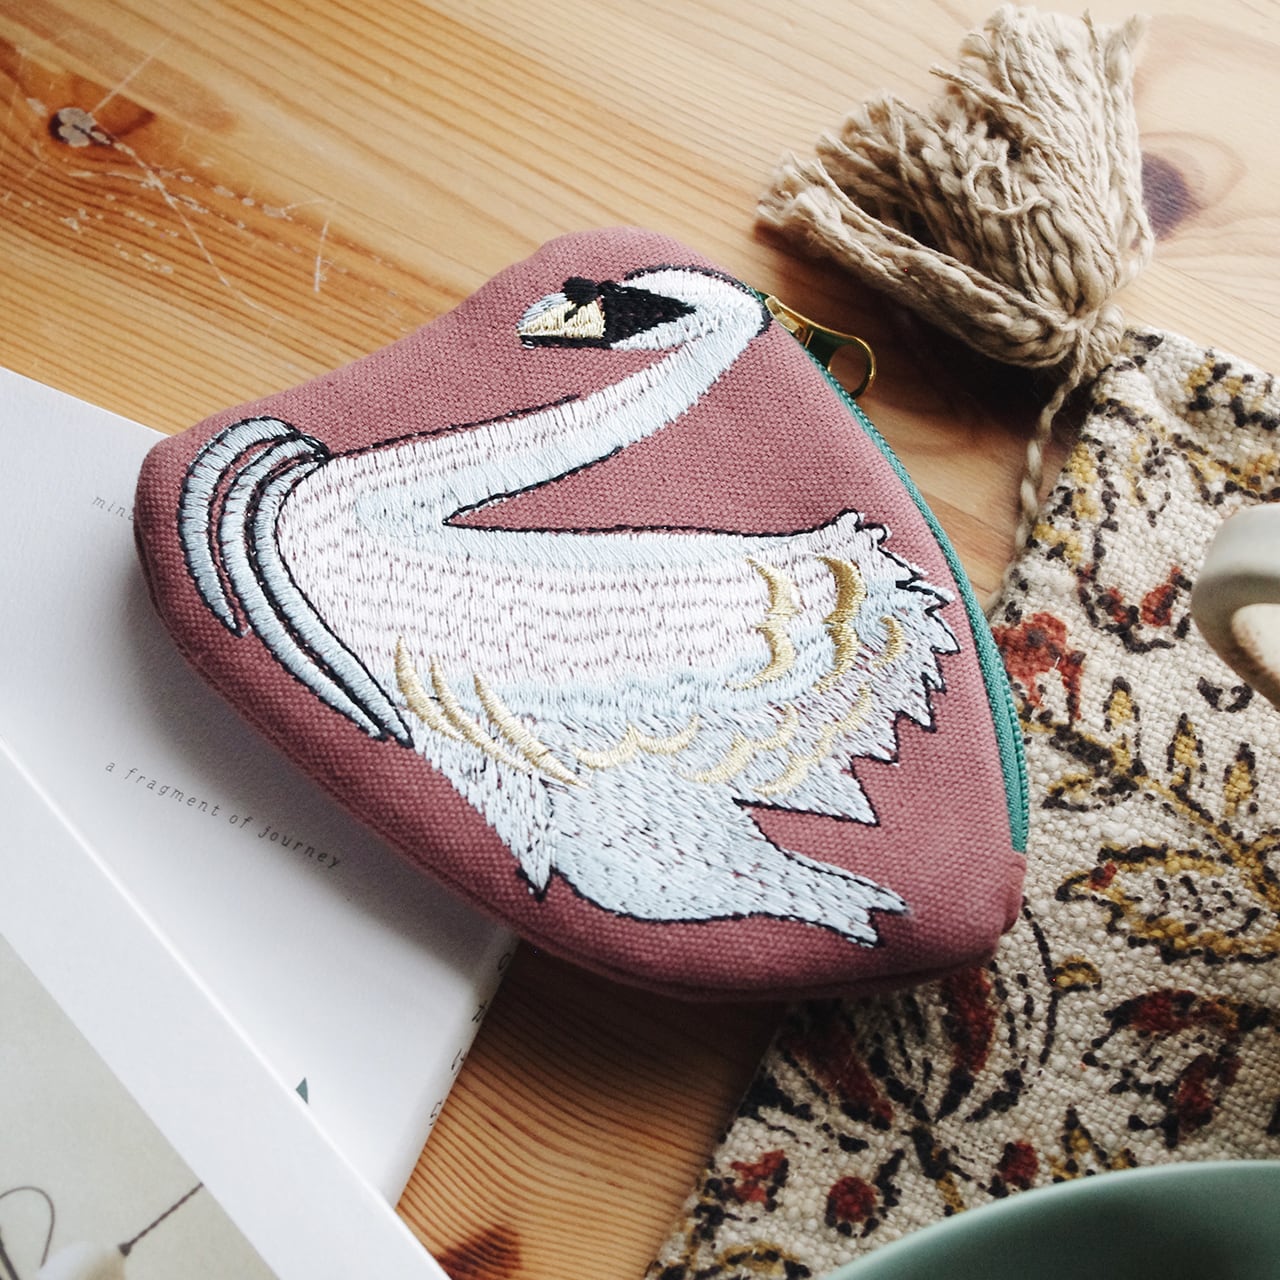 Swan embroidery pouch